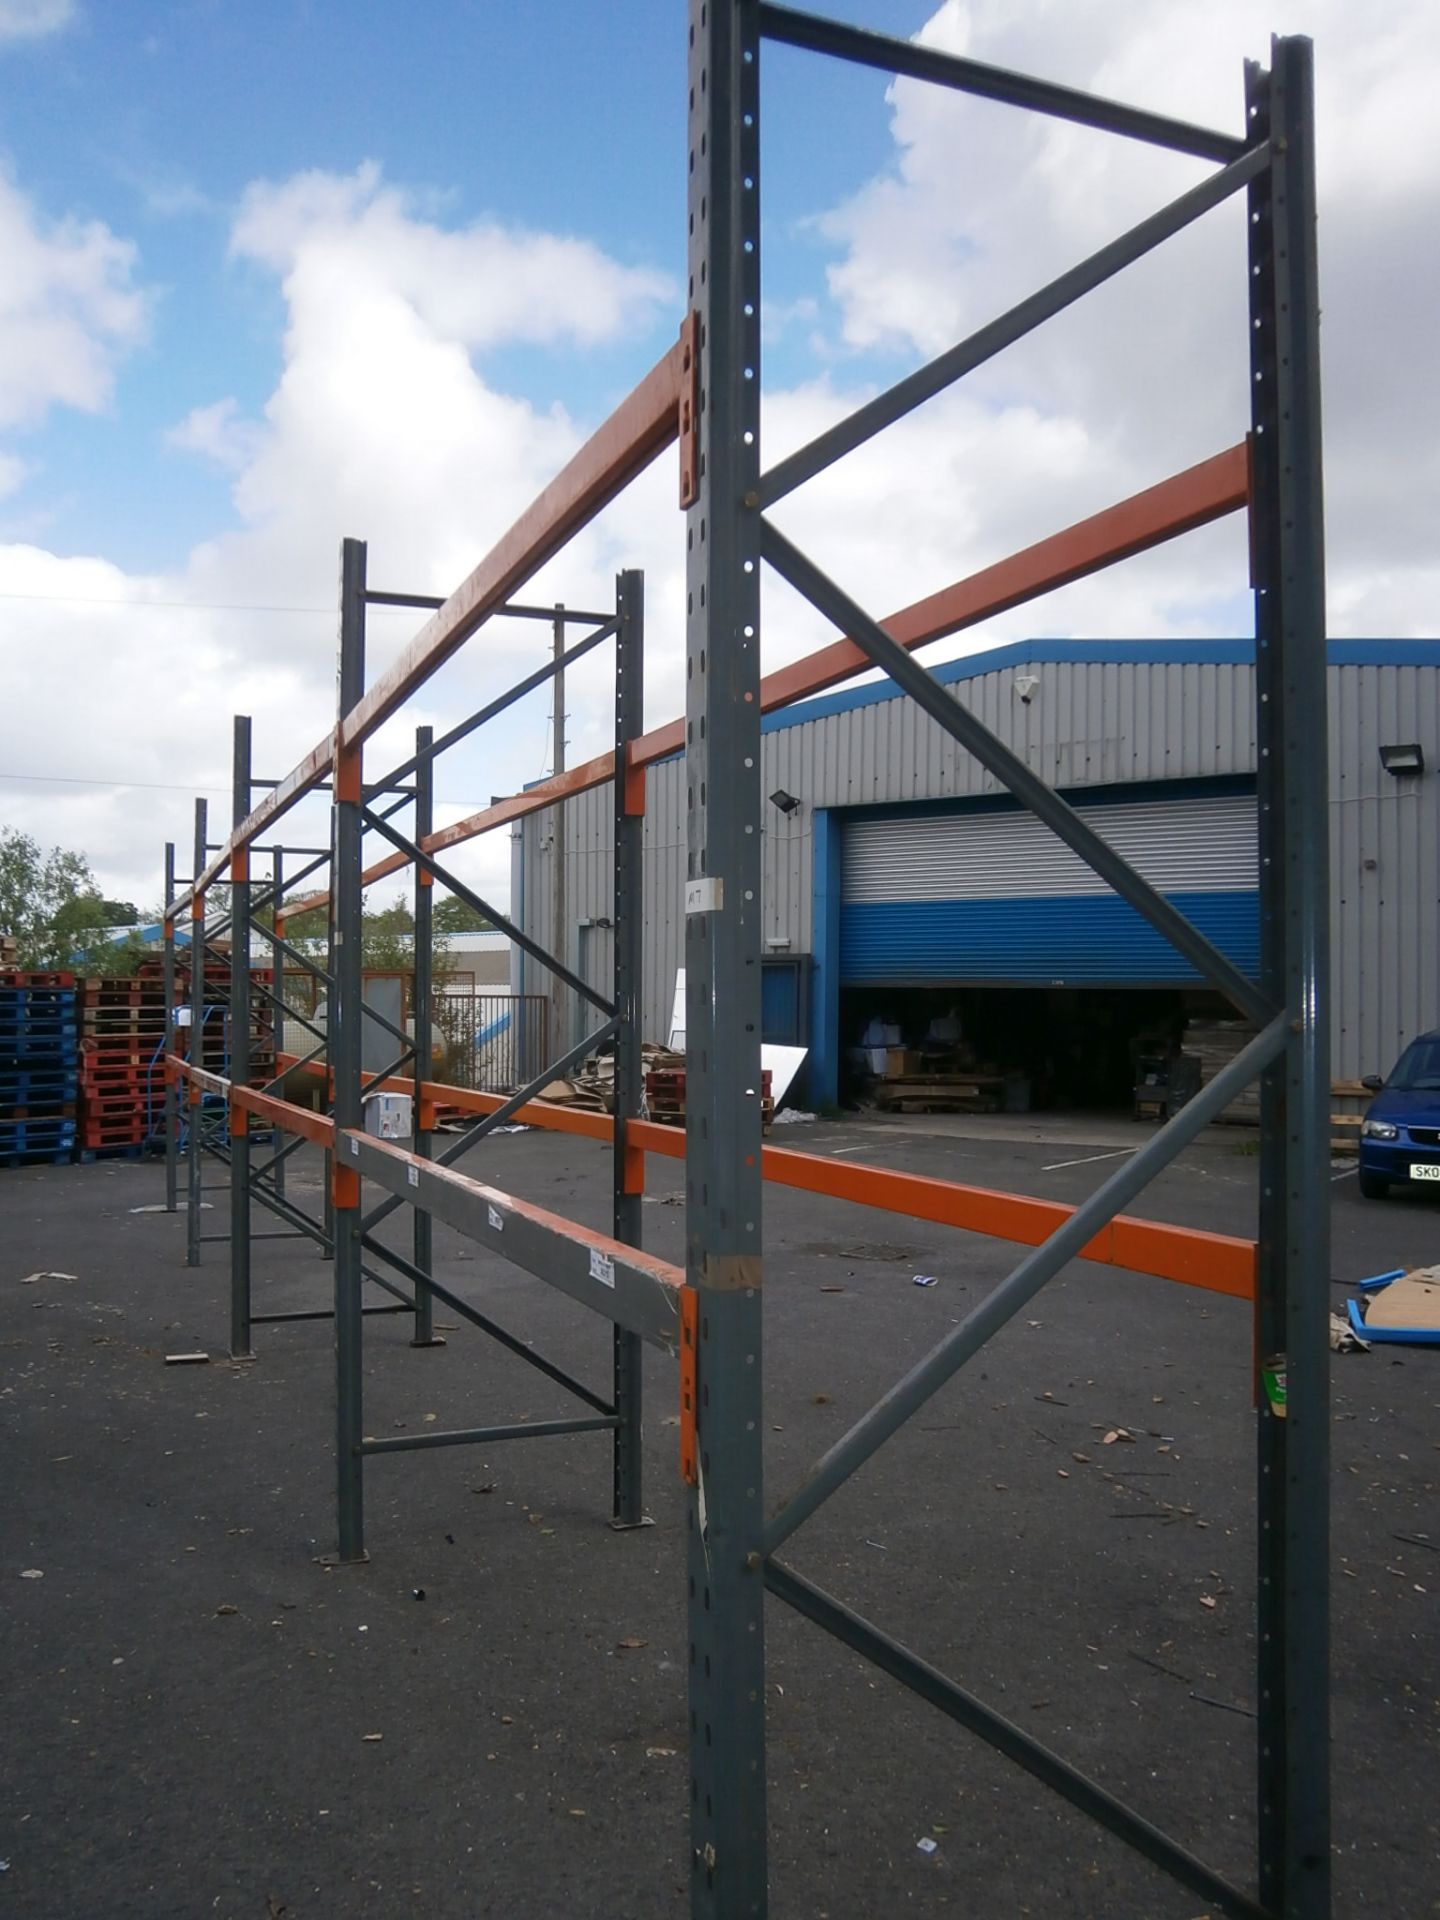 4 x Bays of Commercial Racking - Includes 5 x Uprights, 16 x Beams (Approx Per Bay H - 2900mm, - Image 3 of 5